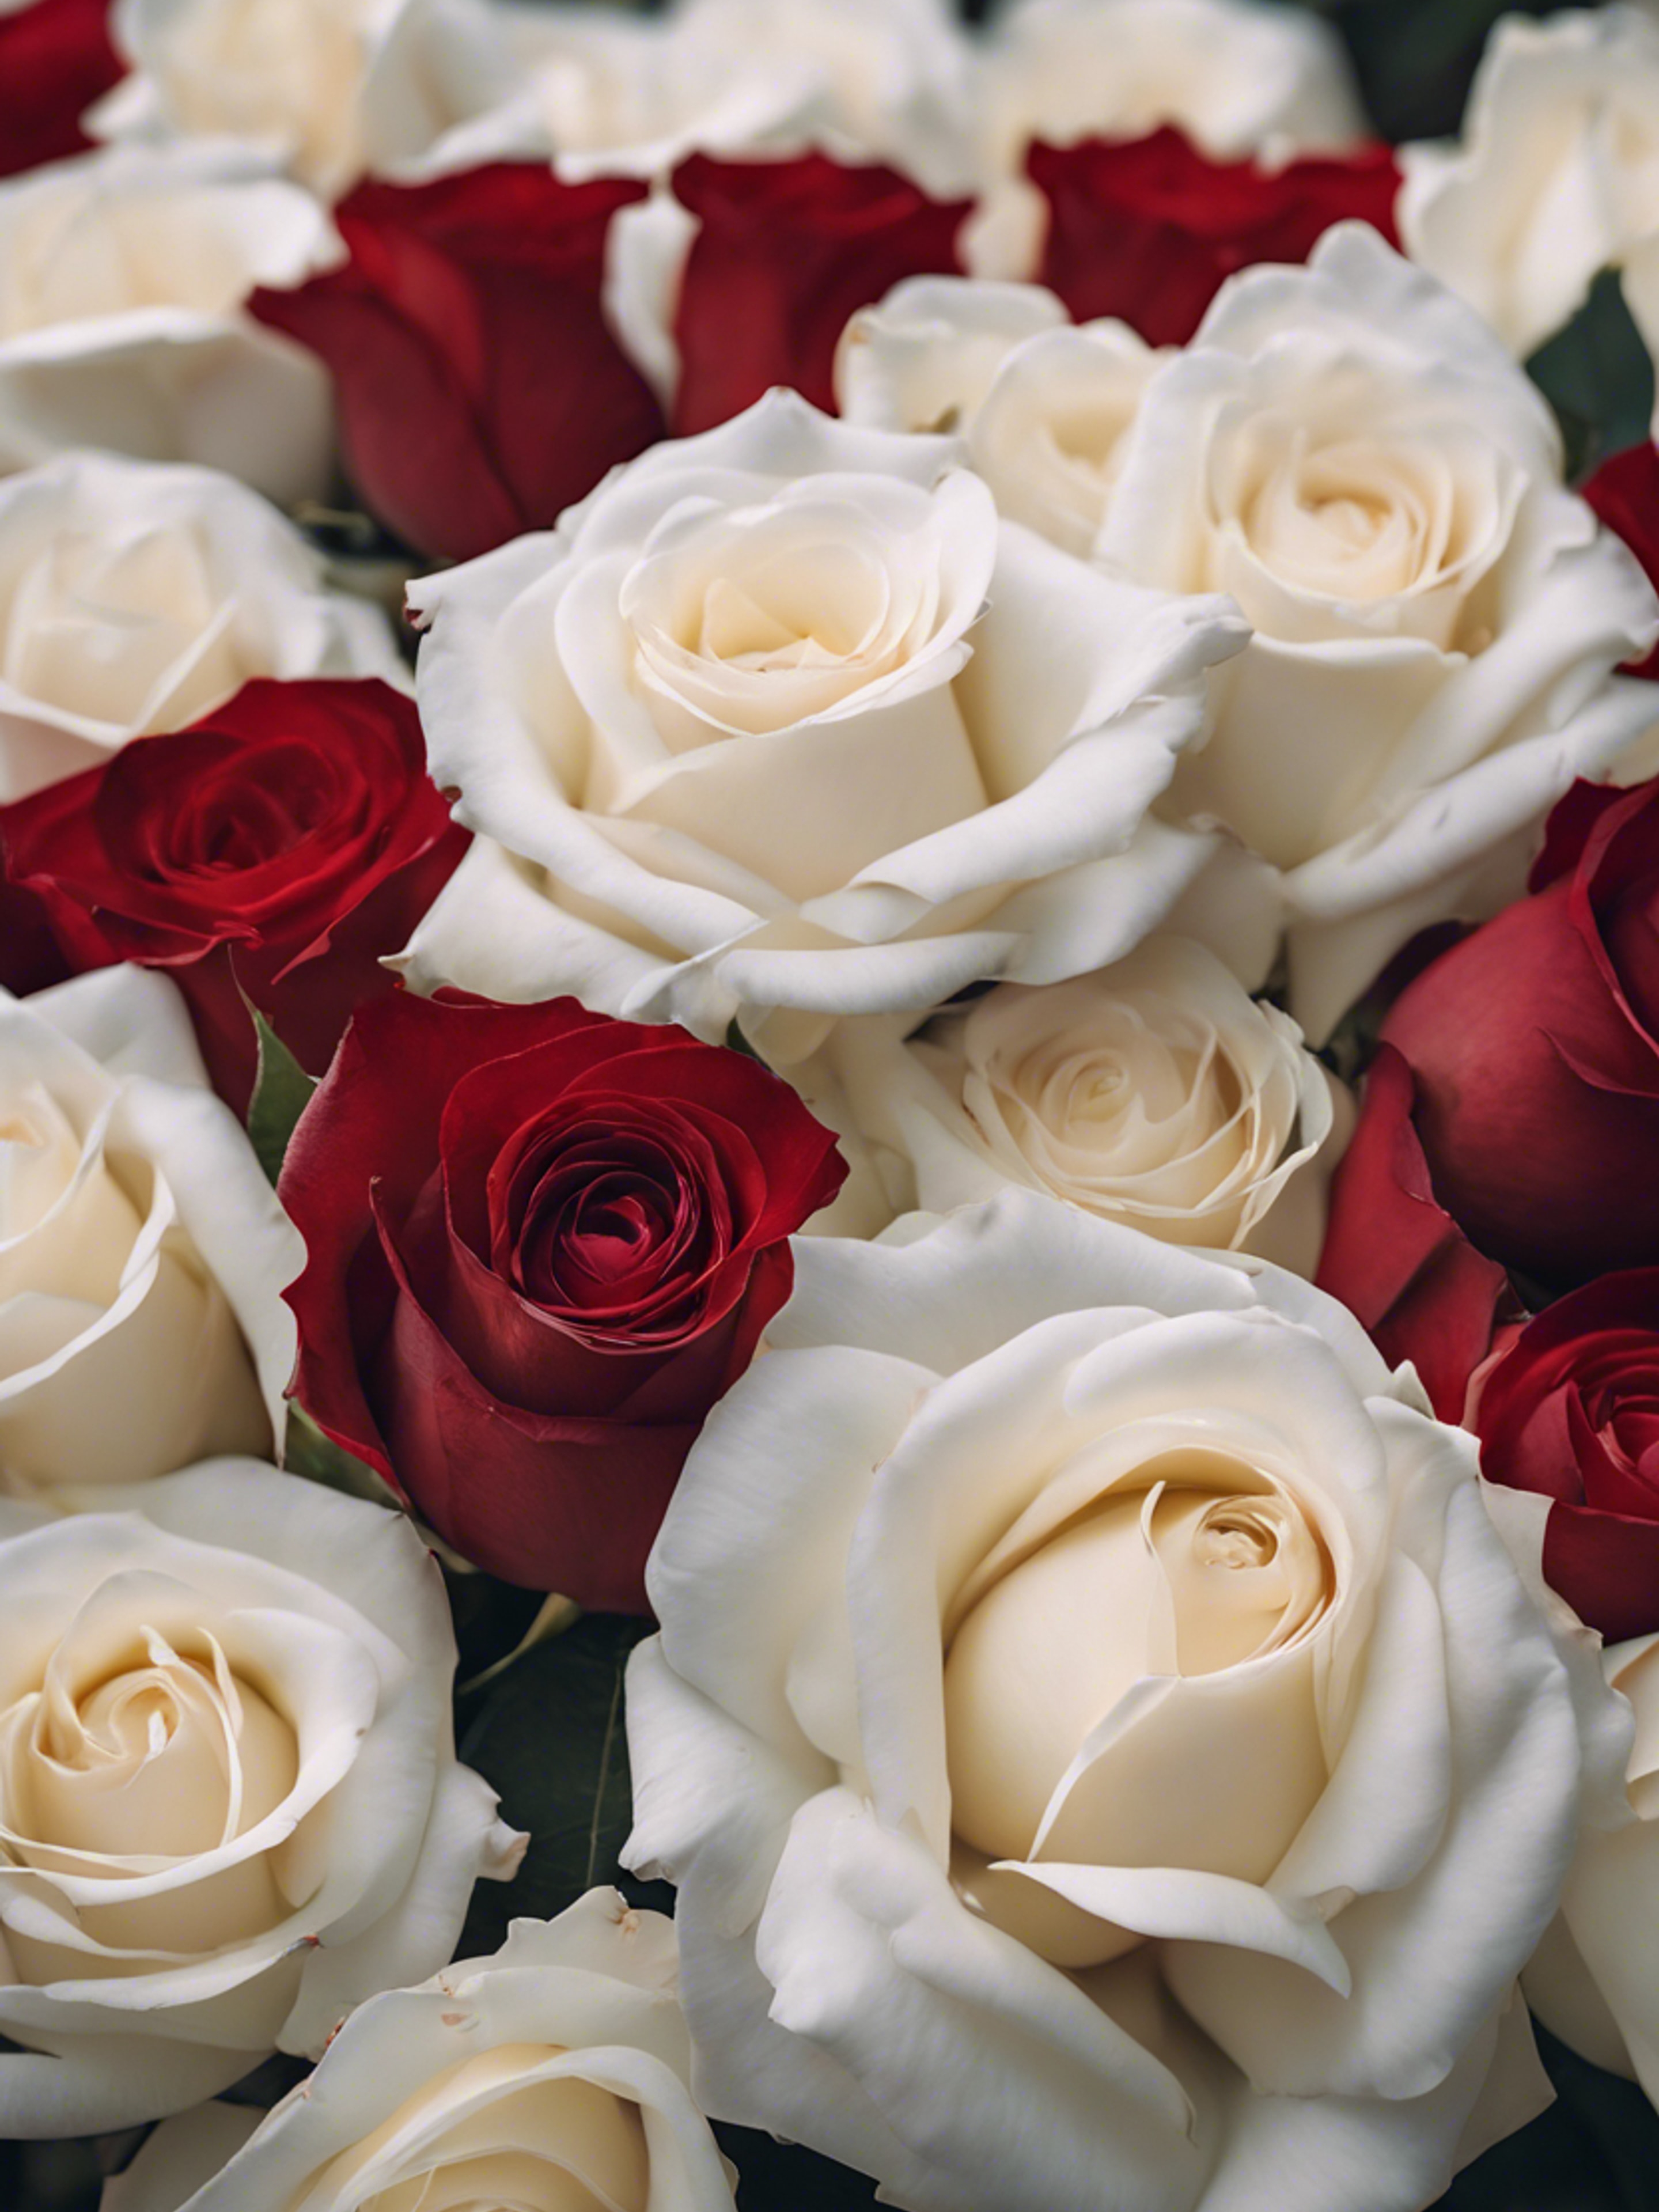 A cluster of white roses with a single red rose nestled in the middle. Tapet[ffa8b13685ab483b9eca]